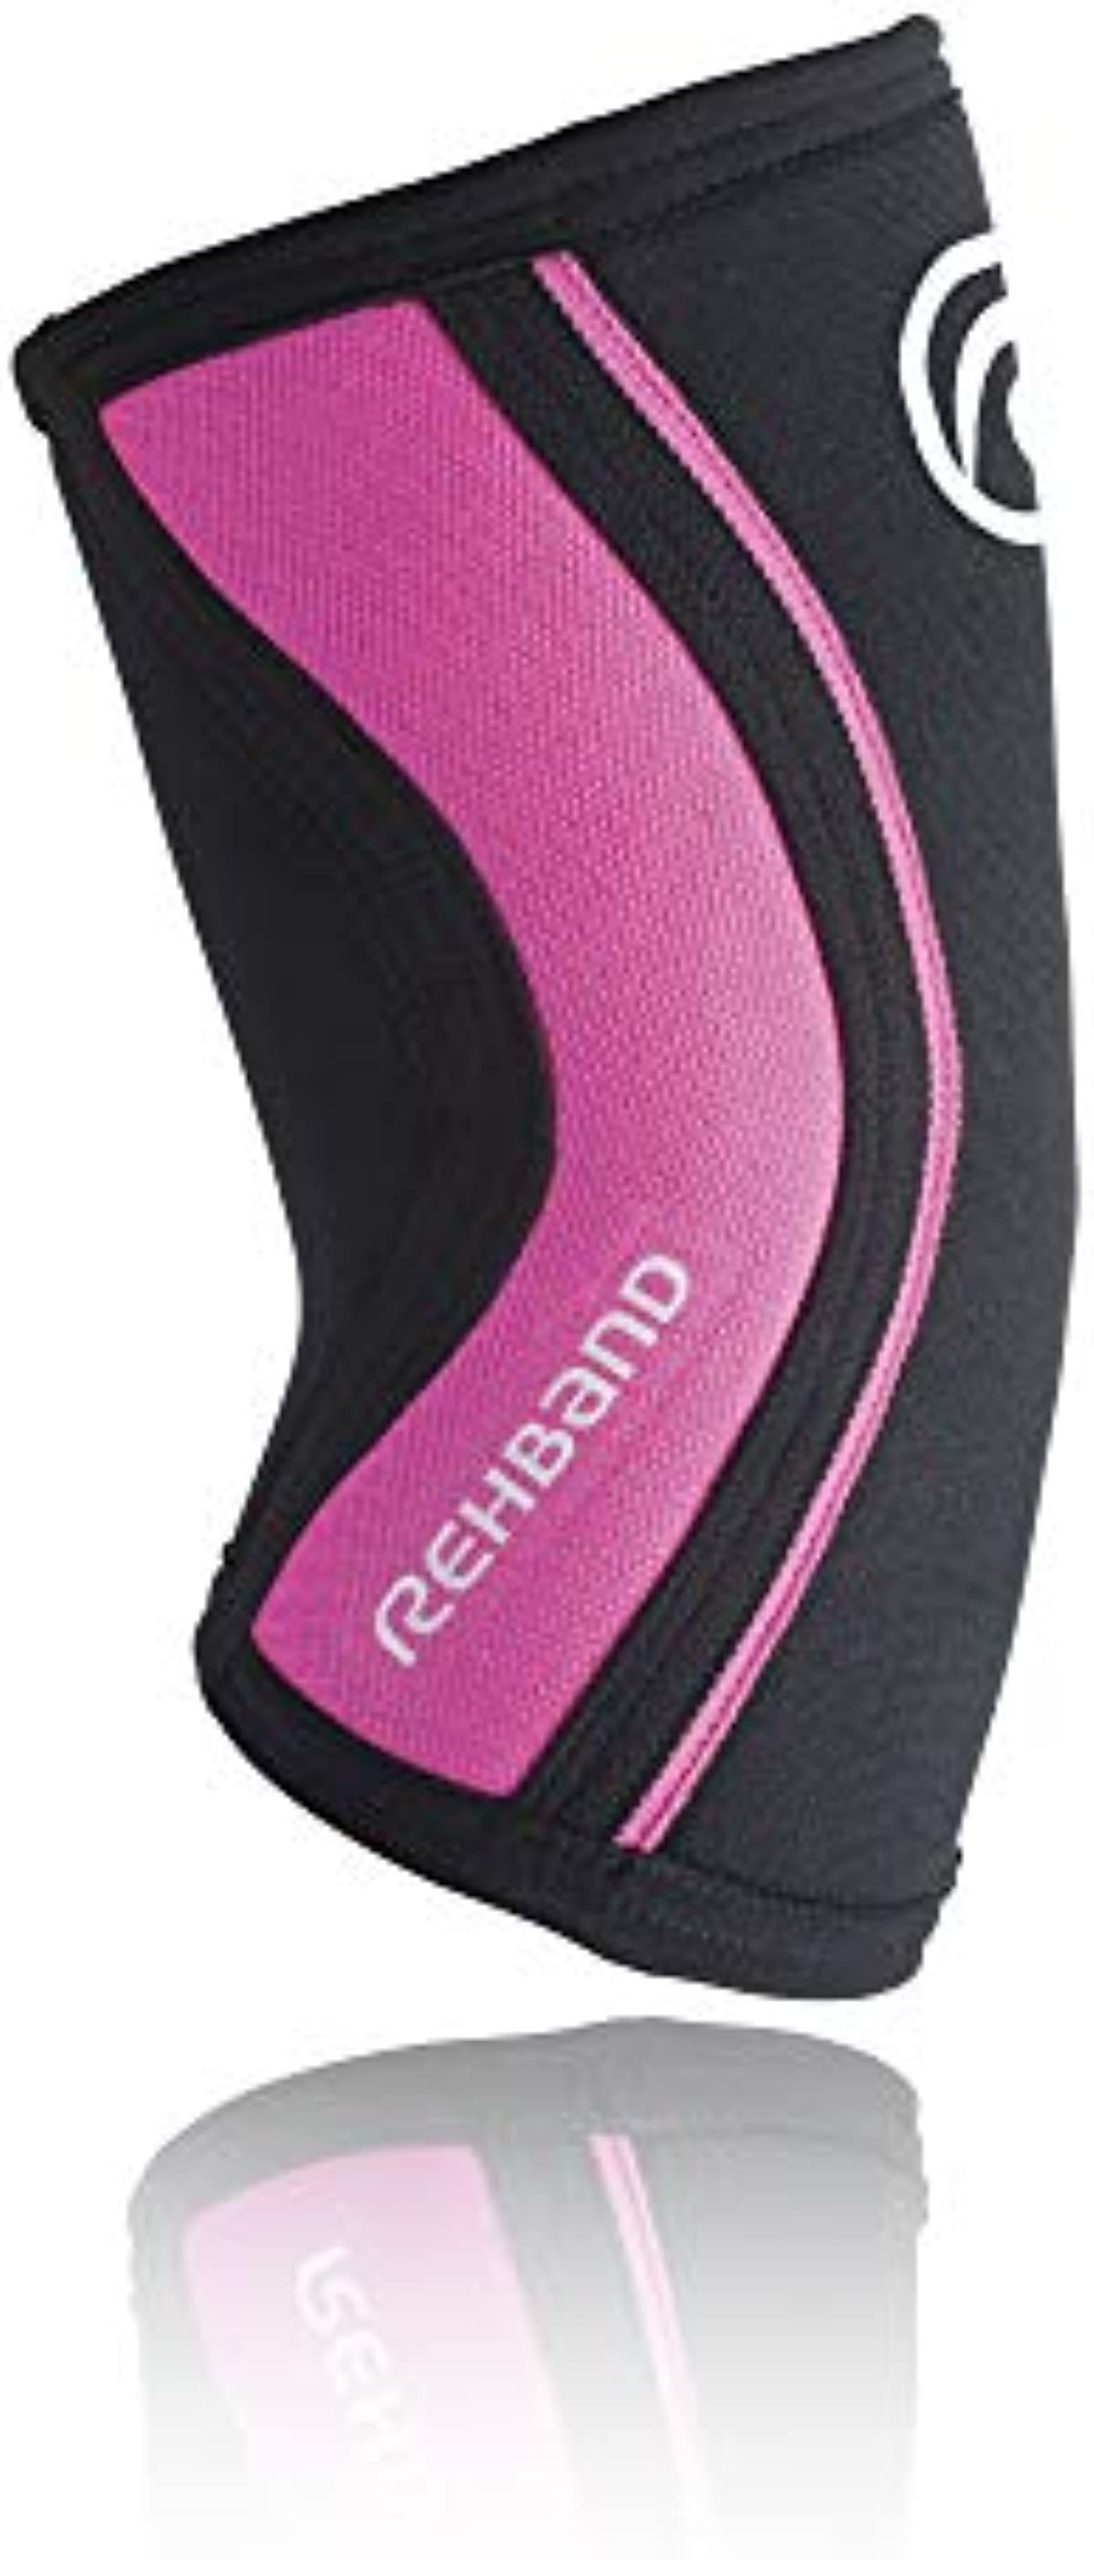 Rehband Rx Elbow Support 5mm - Xlarge - Black/Pink